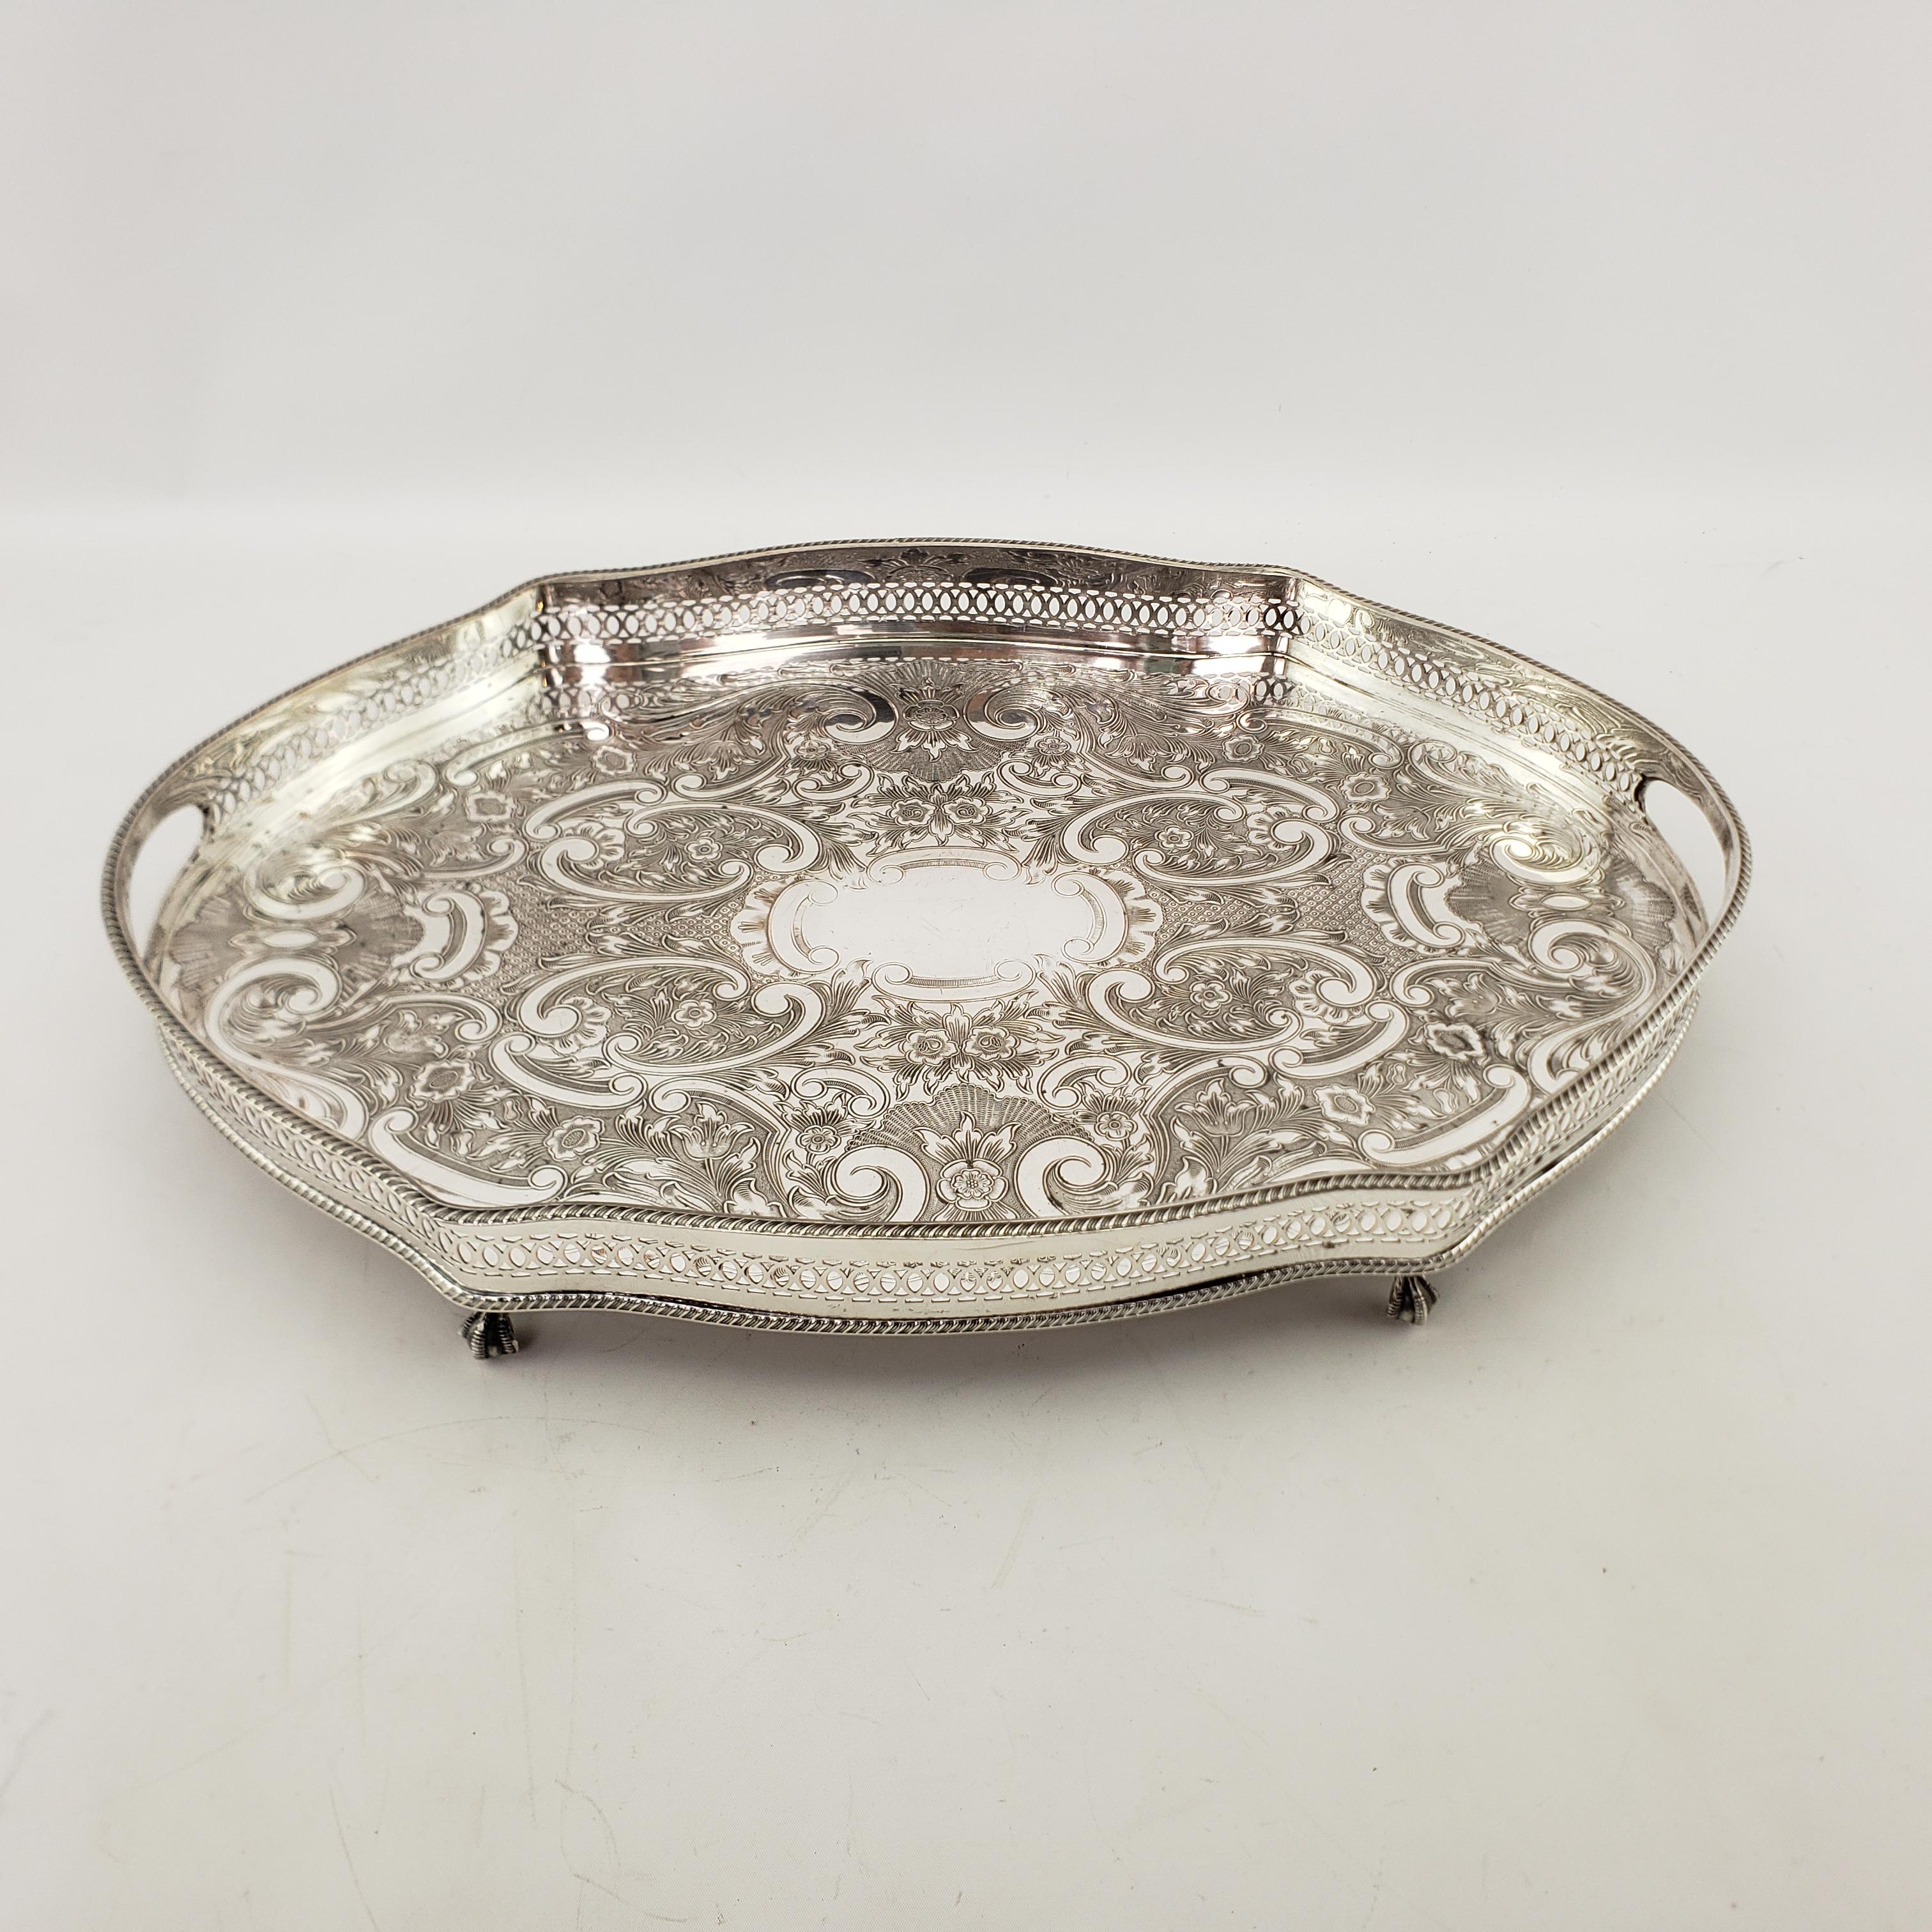 20th Century Antique Silver Plated Footed Gallery Serving Tray with Ornate Floral Engraving